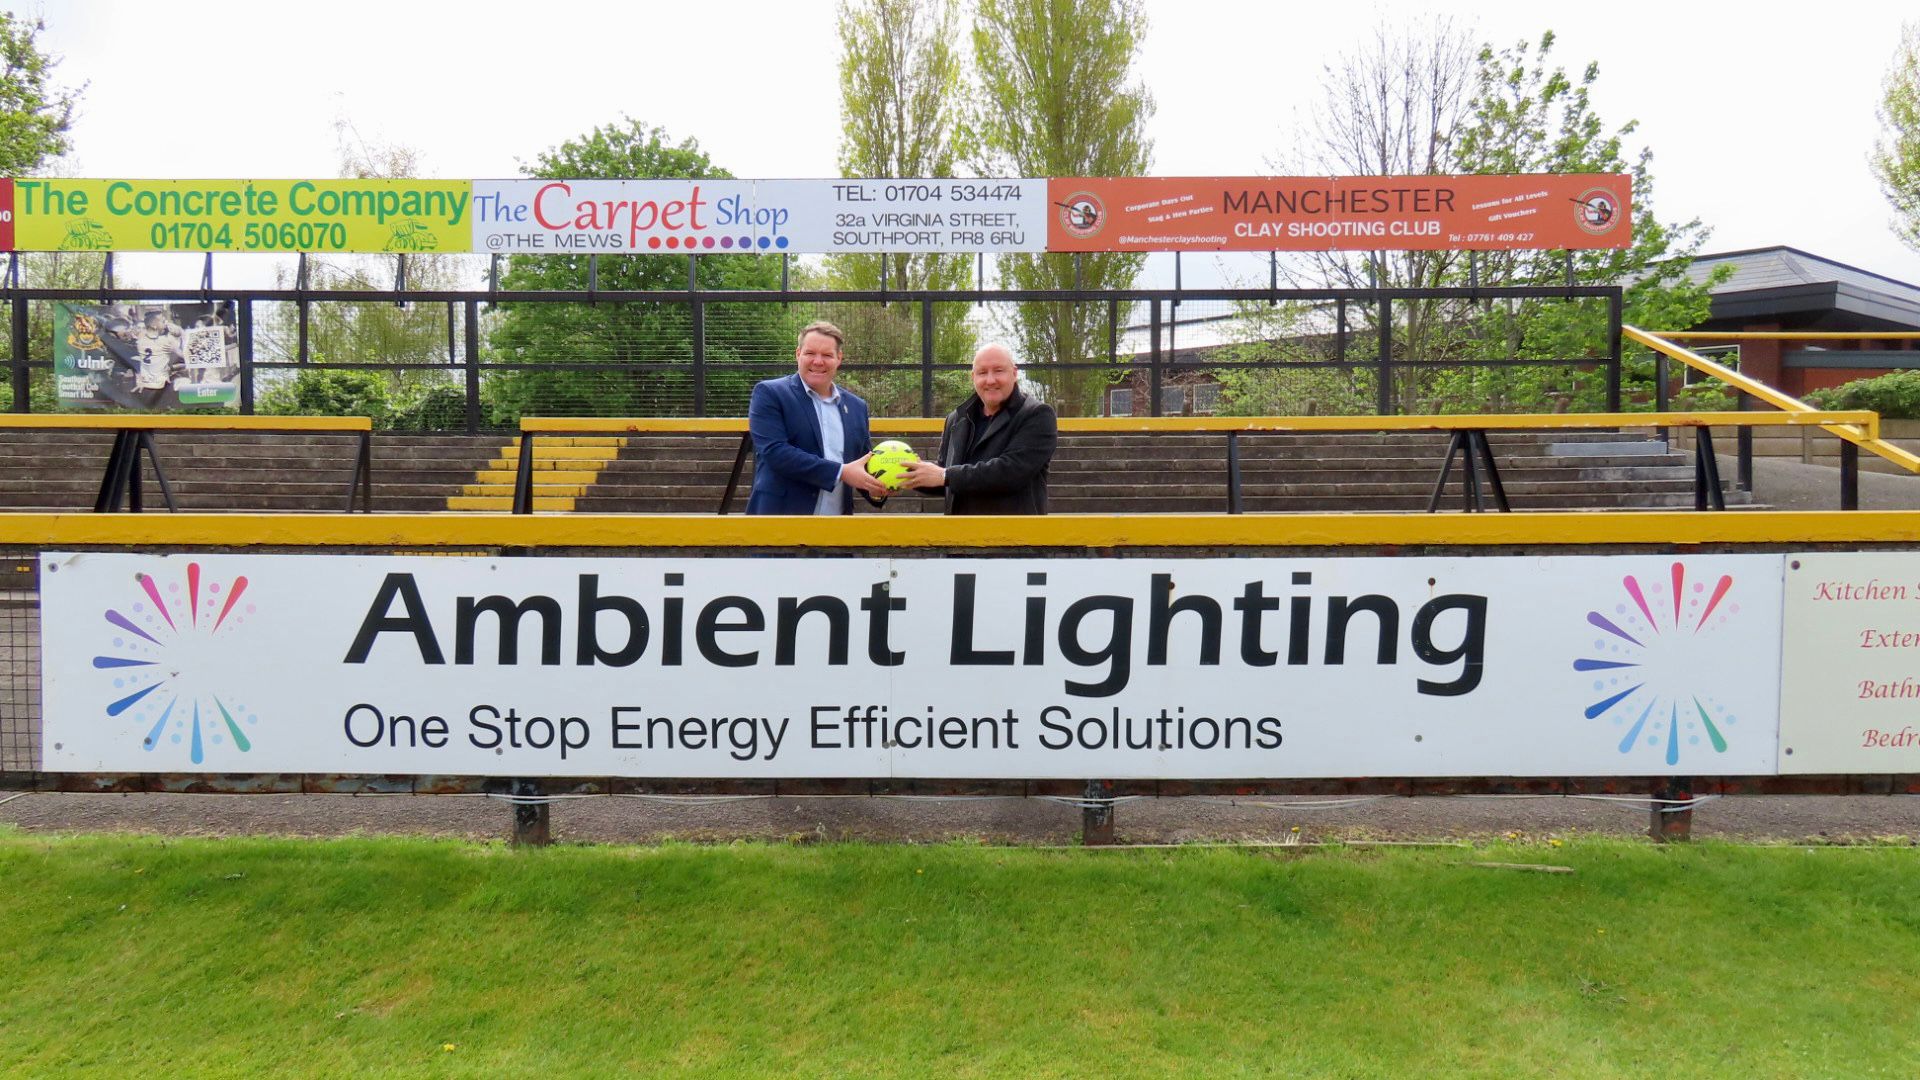 Ambient Group Services is thrilled to be able to provide financial backing for Southport Football Club. Ambient Group Services Director Joseph McLoughlin with Steven Brown from Southport Football Club. Photo by Andrew Brown of Stand Up For Southport